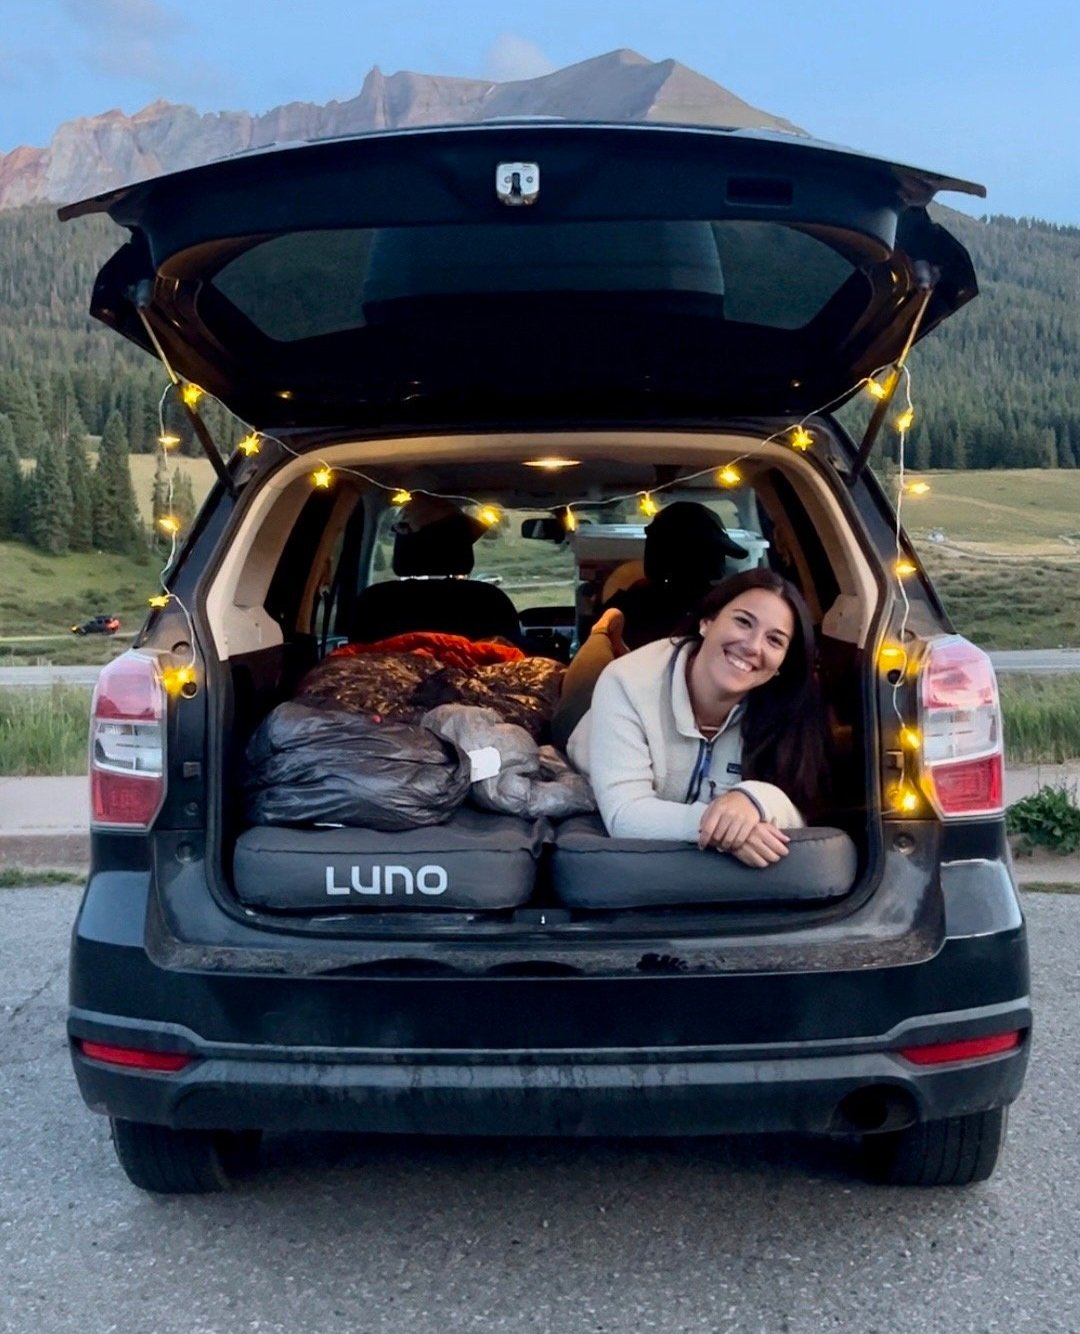 Car camping: everything you need to know